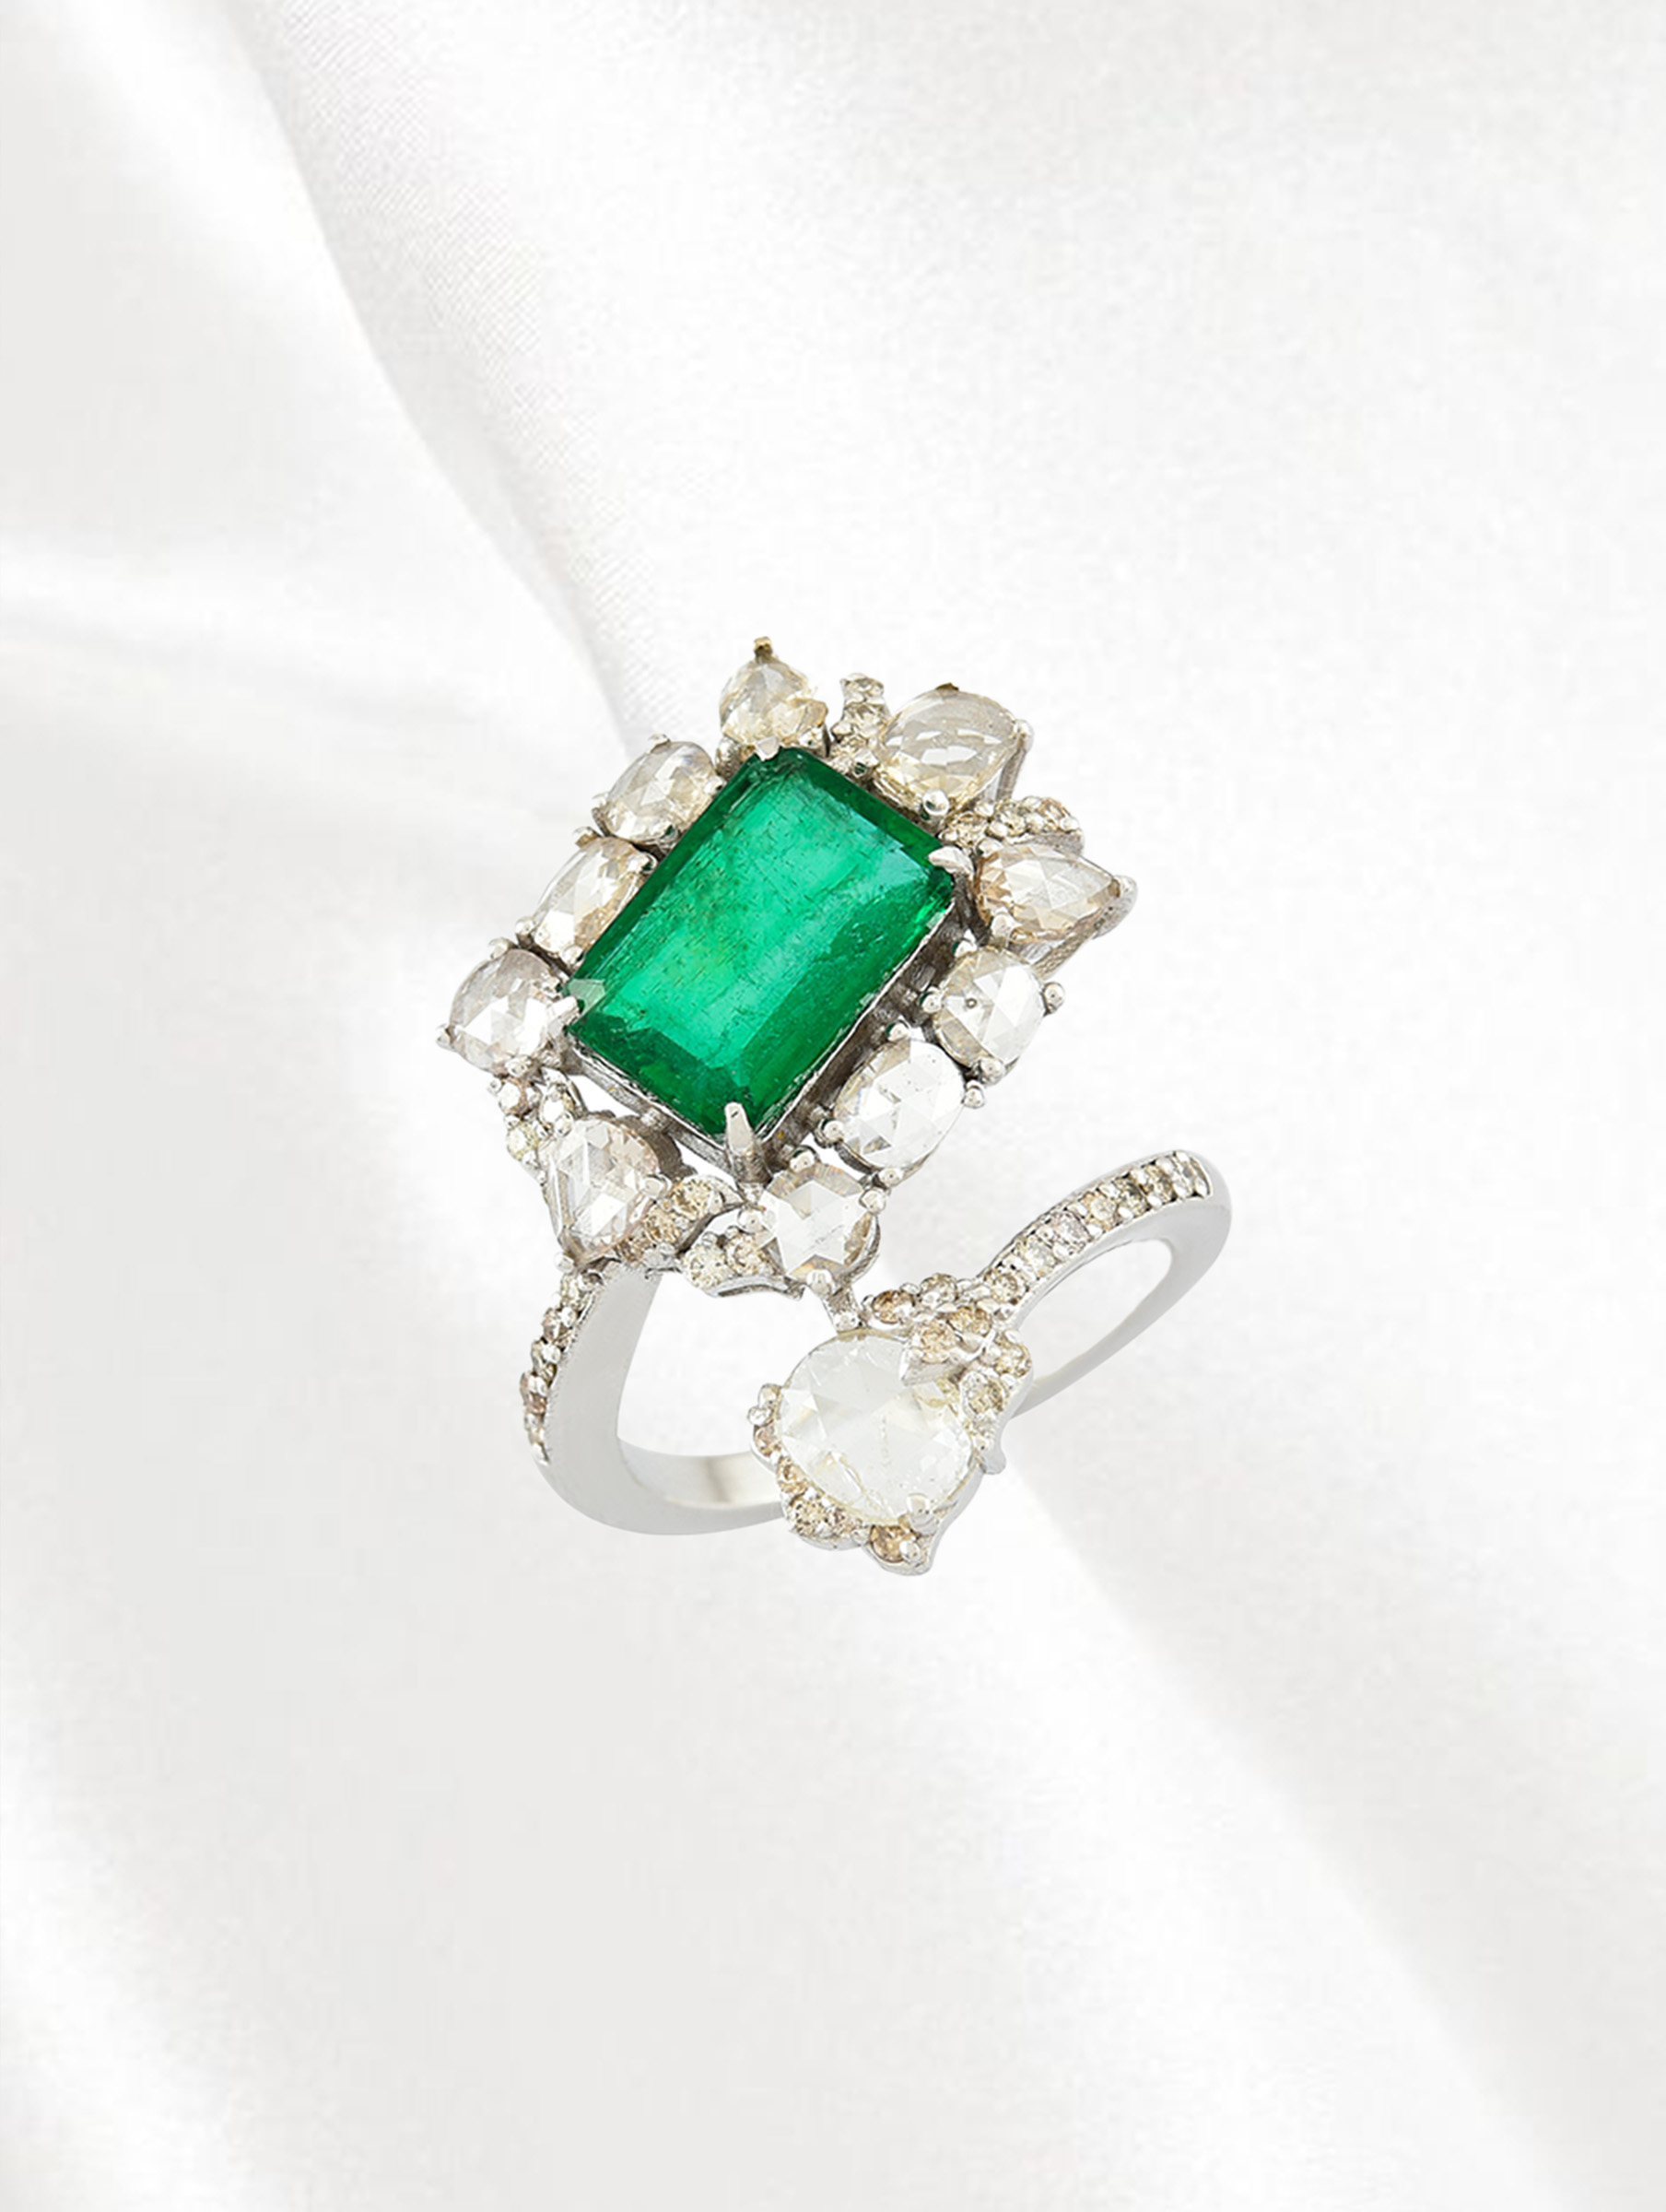 Emerald and diamond ring with a diamond-frosted band from Amrapali 